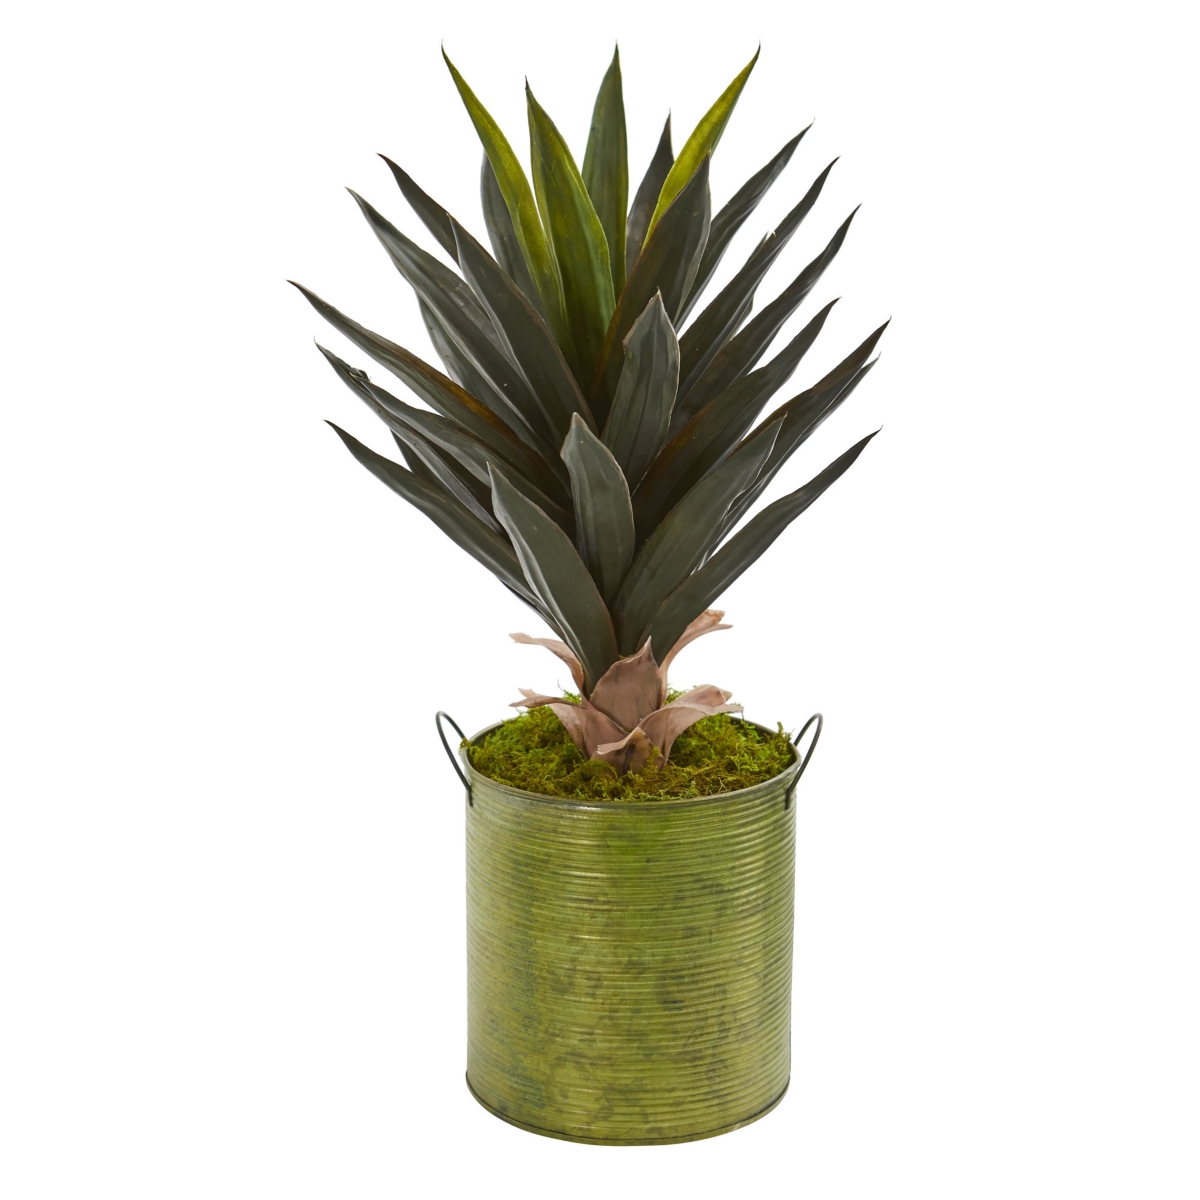 Agave Artificial Plant in Metal Planter - Green